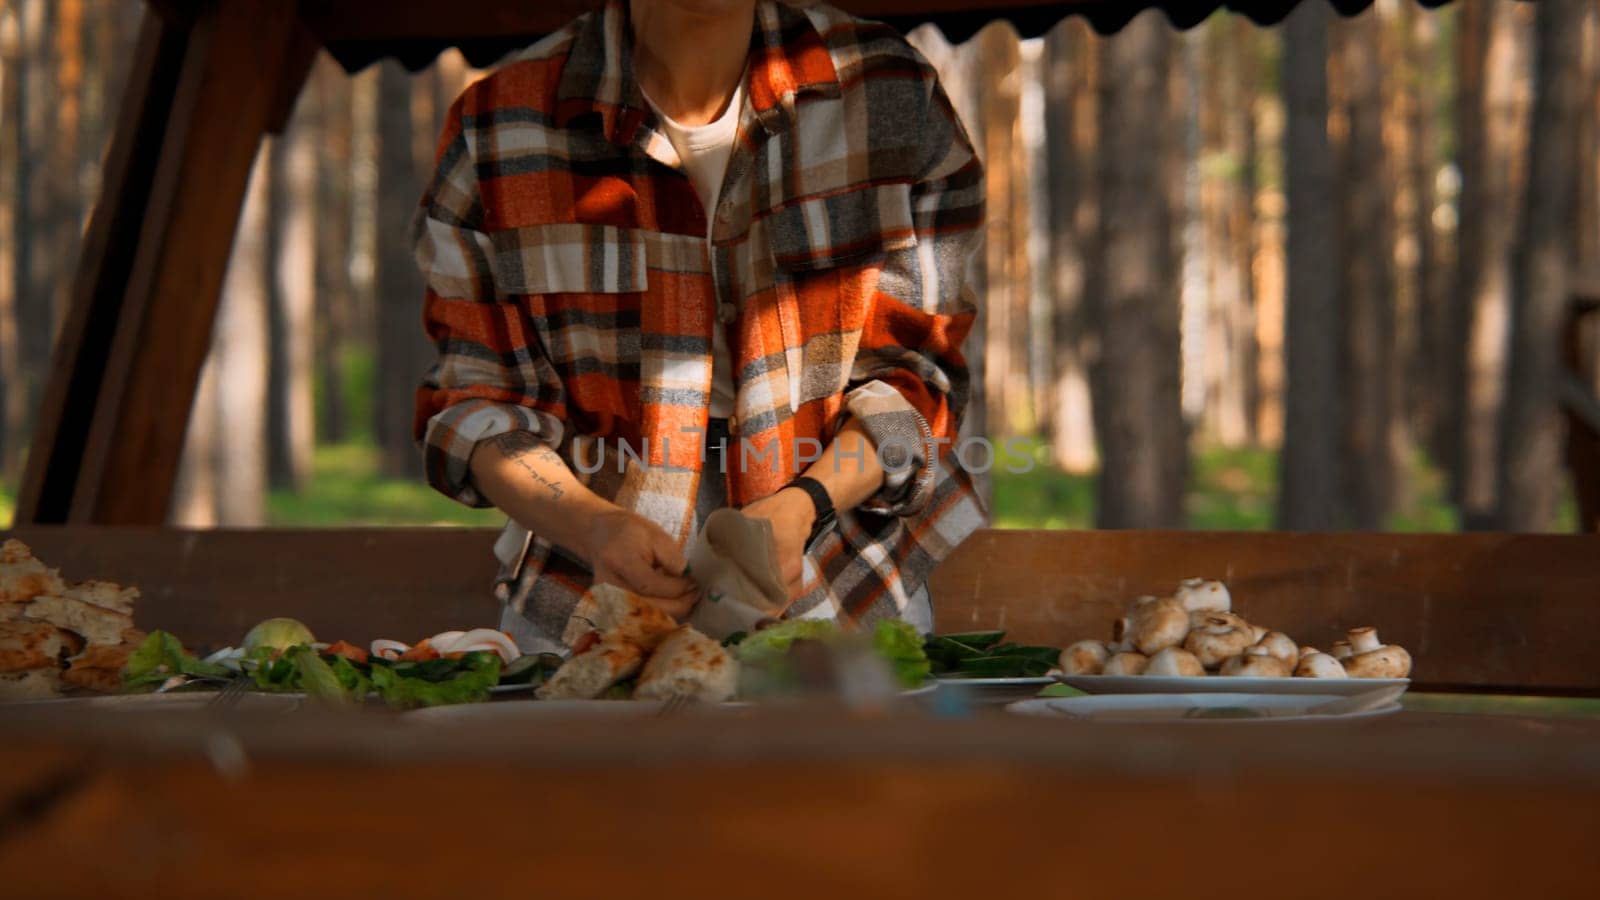 Woman serving table at outdoors picnic. Stock footage. Summer forest and bbq. by Mediawhalestock